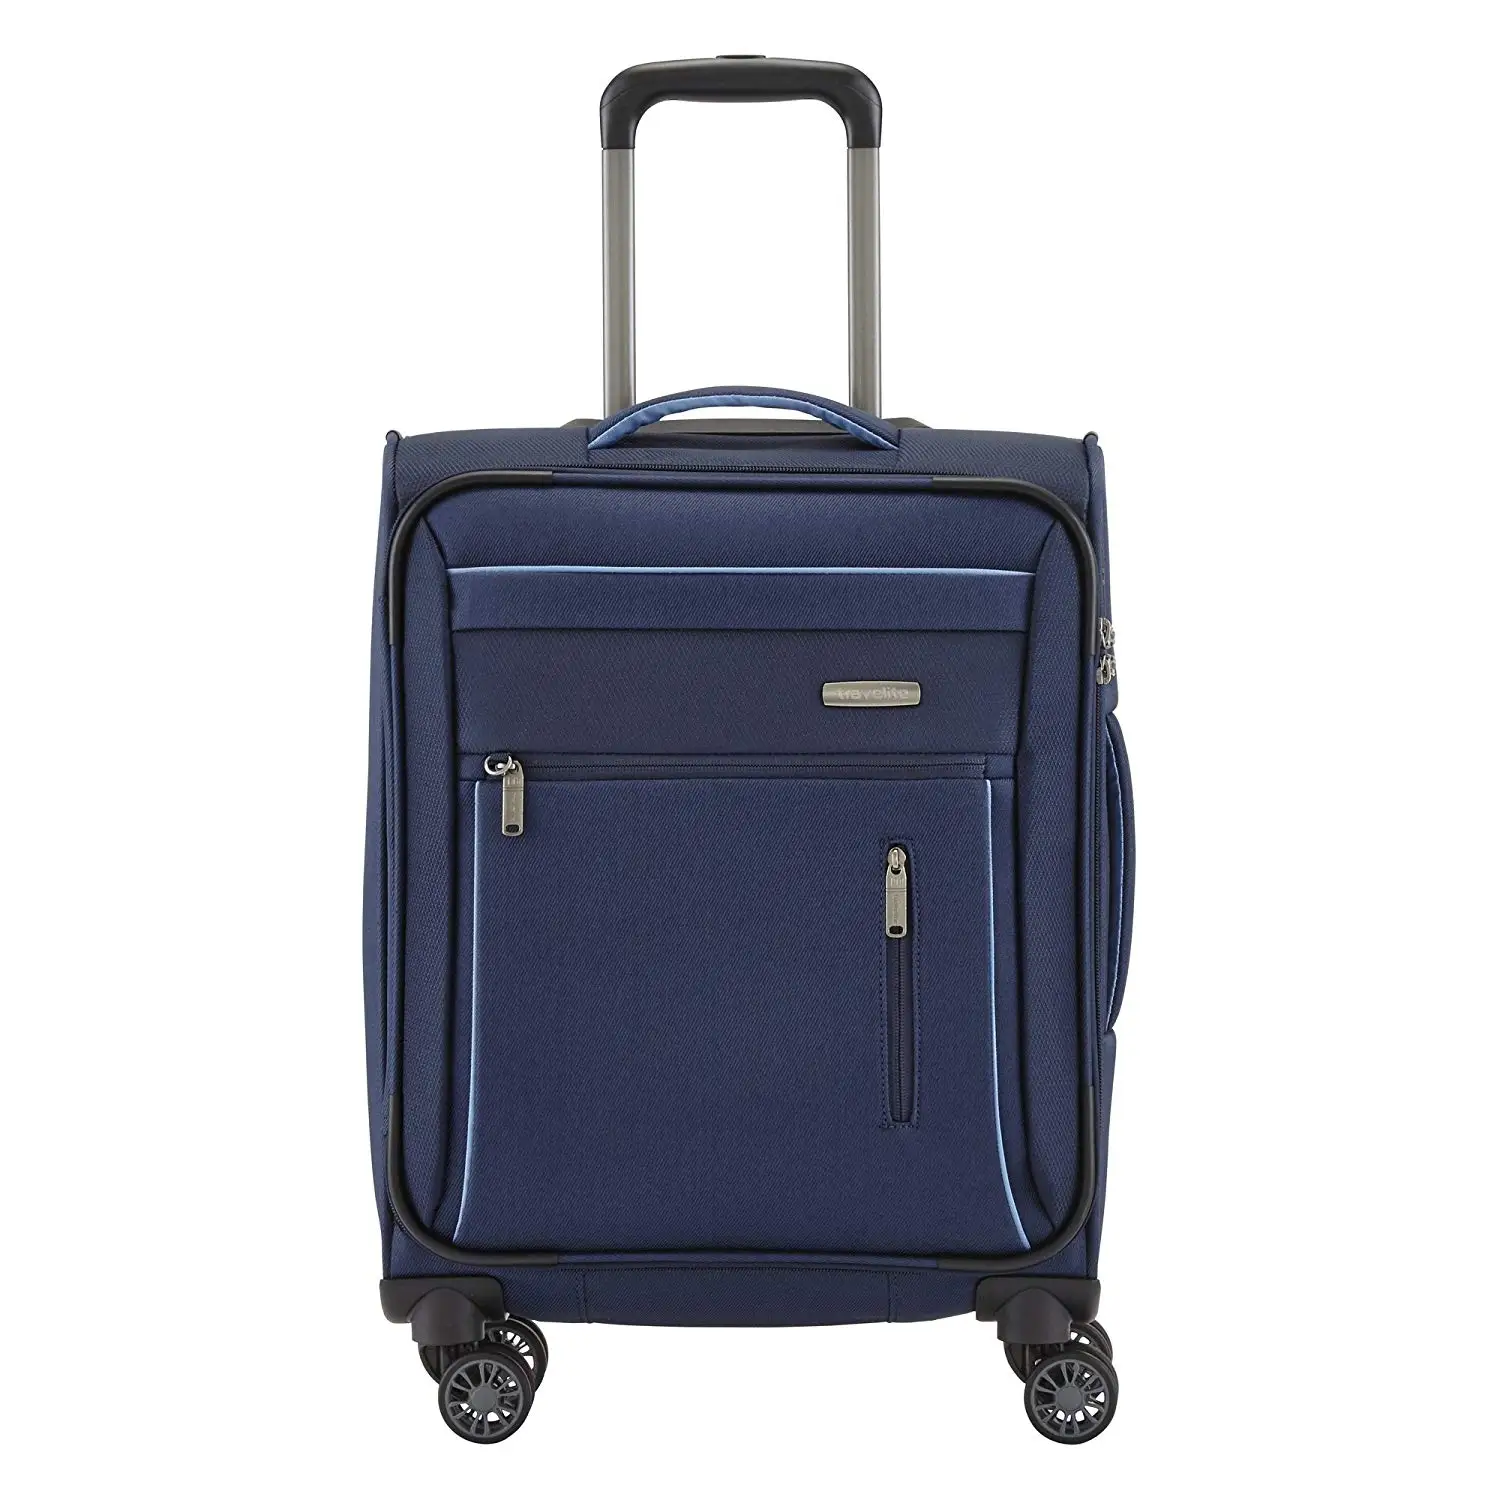 Cheap Travelite Luggage, find Travelite Luggage deals on line at ...